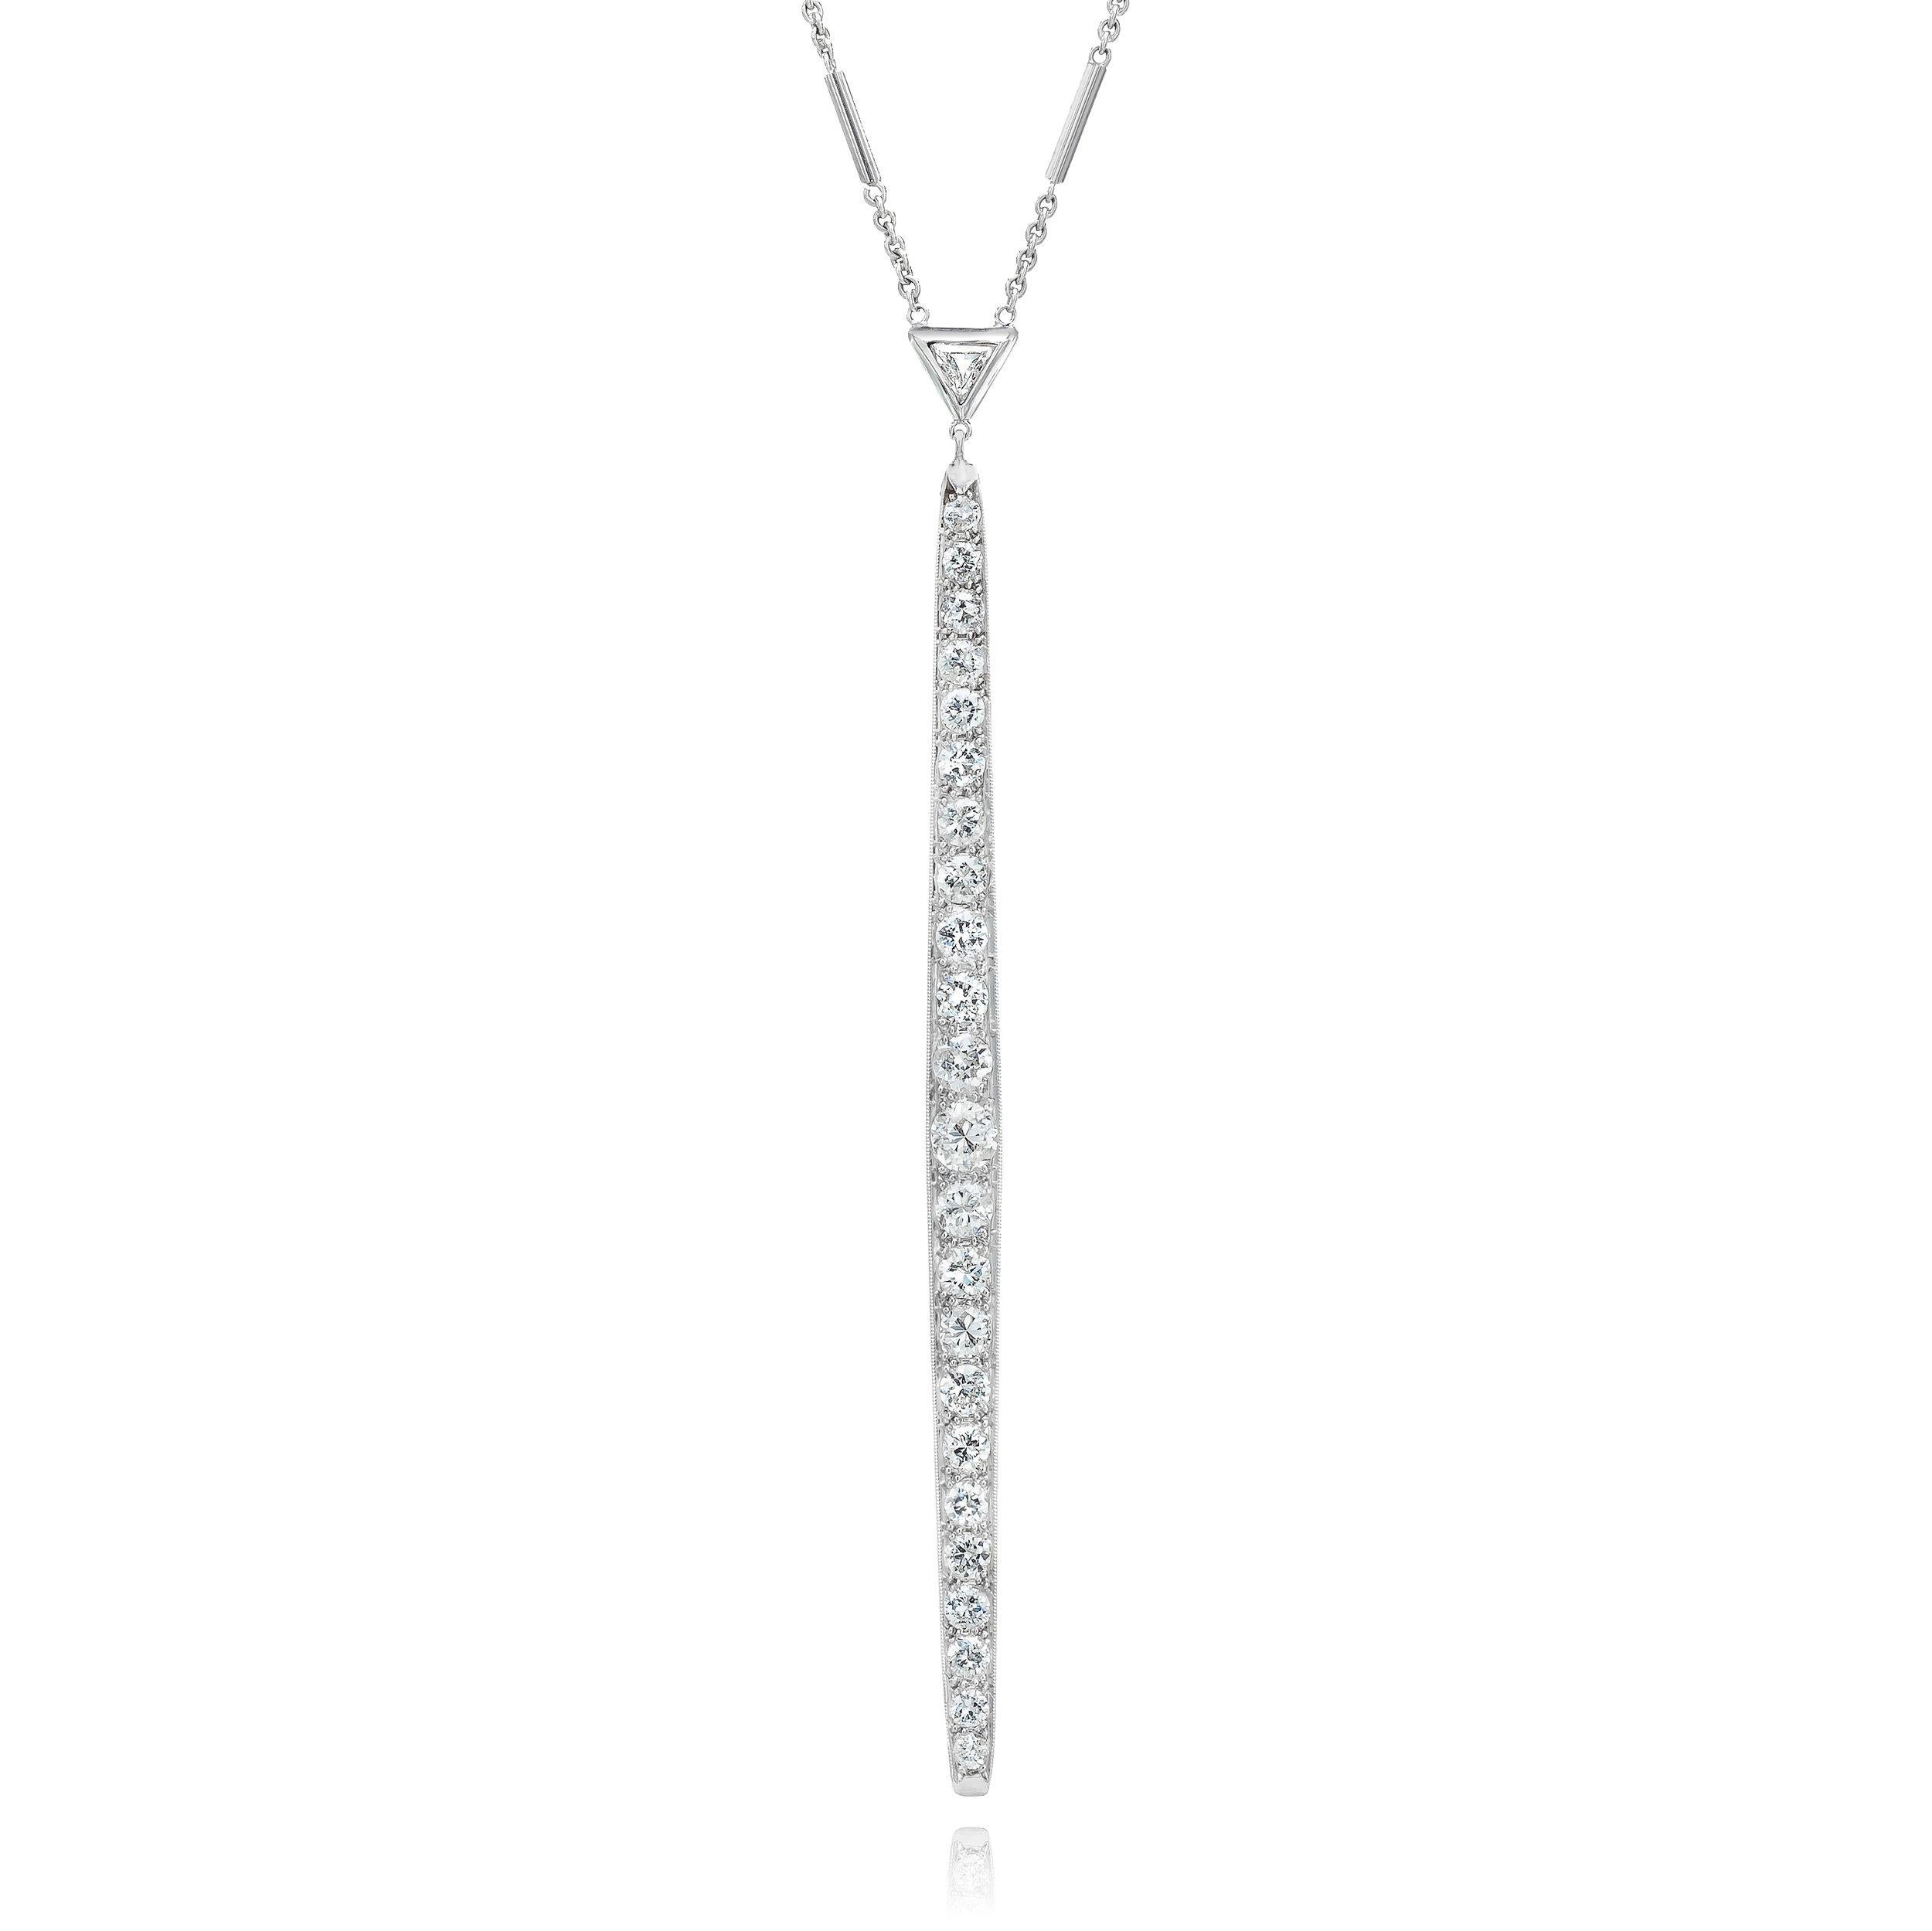 Platinum diamond Bar, approximately 2.75+ carats of Old-Mine Diamonds. (original setting, Diamonds can not be removed to weigh) Small Trillion/Shield Diamond set in 18k; attached to a bar/link alternating Art Deco 18k Gold chain (great clasp). Total